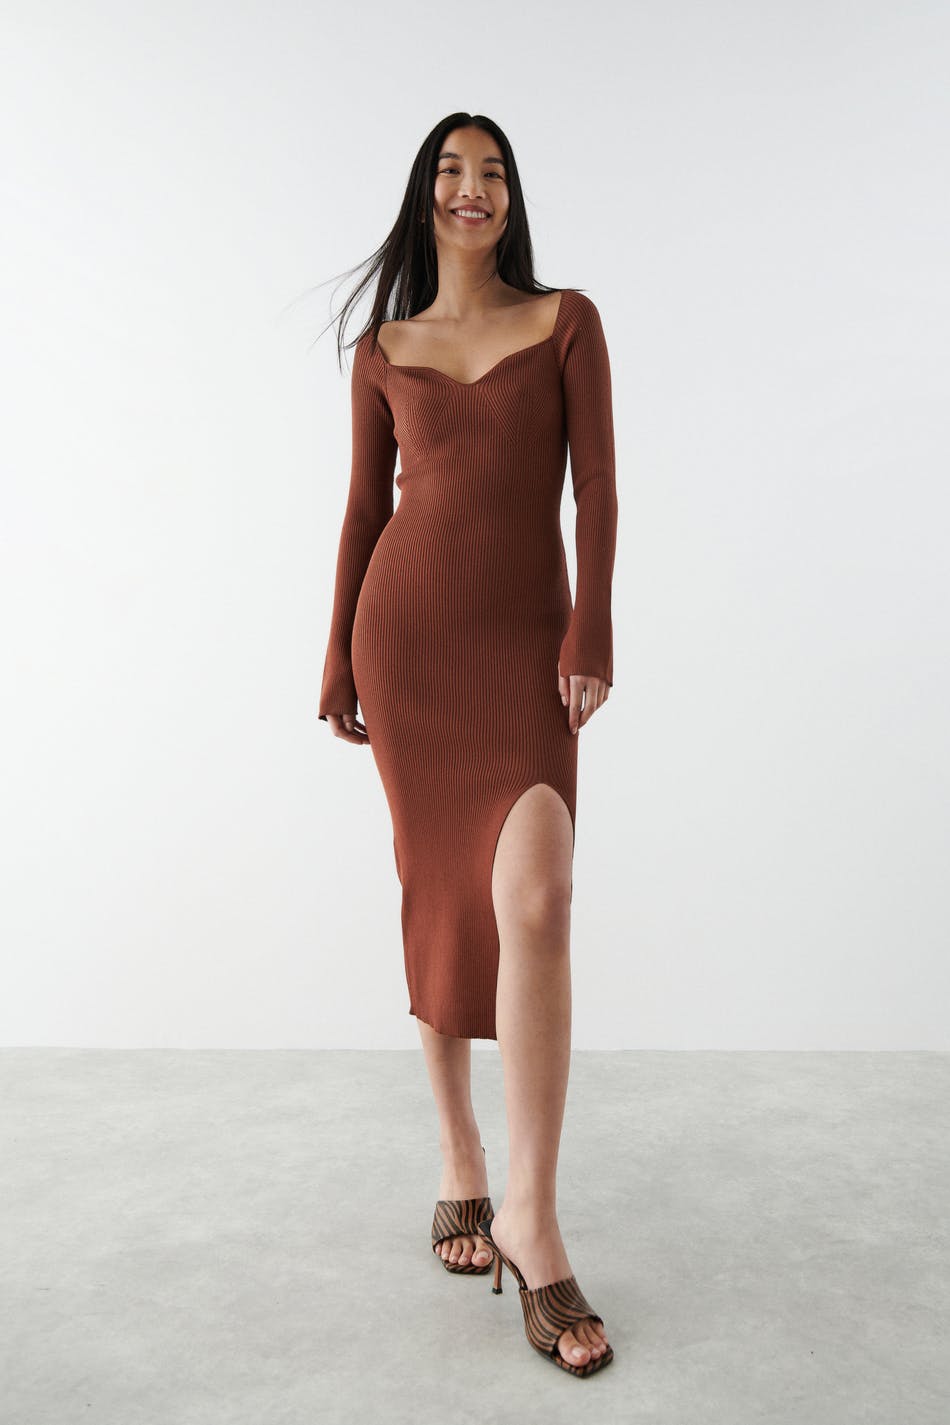 Fiona knitted dress, Gina Tricot